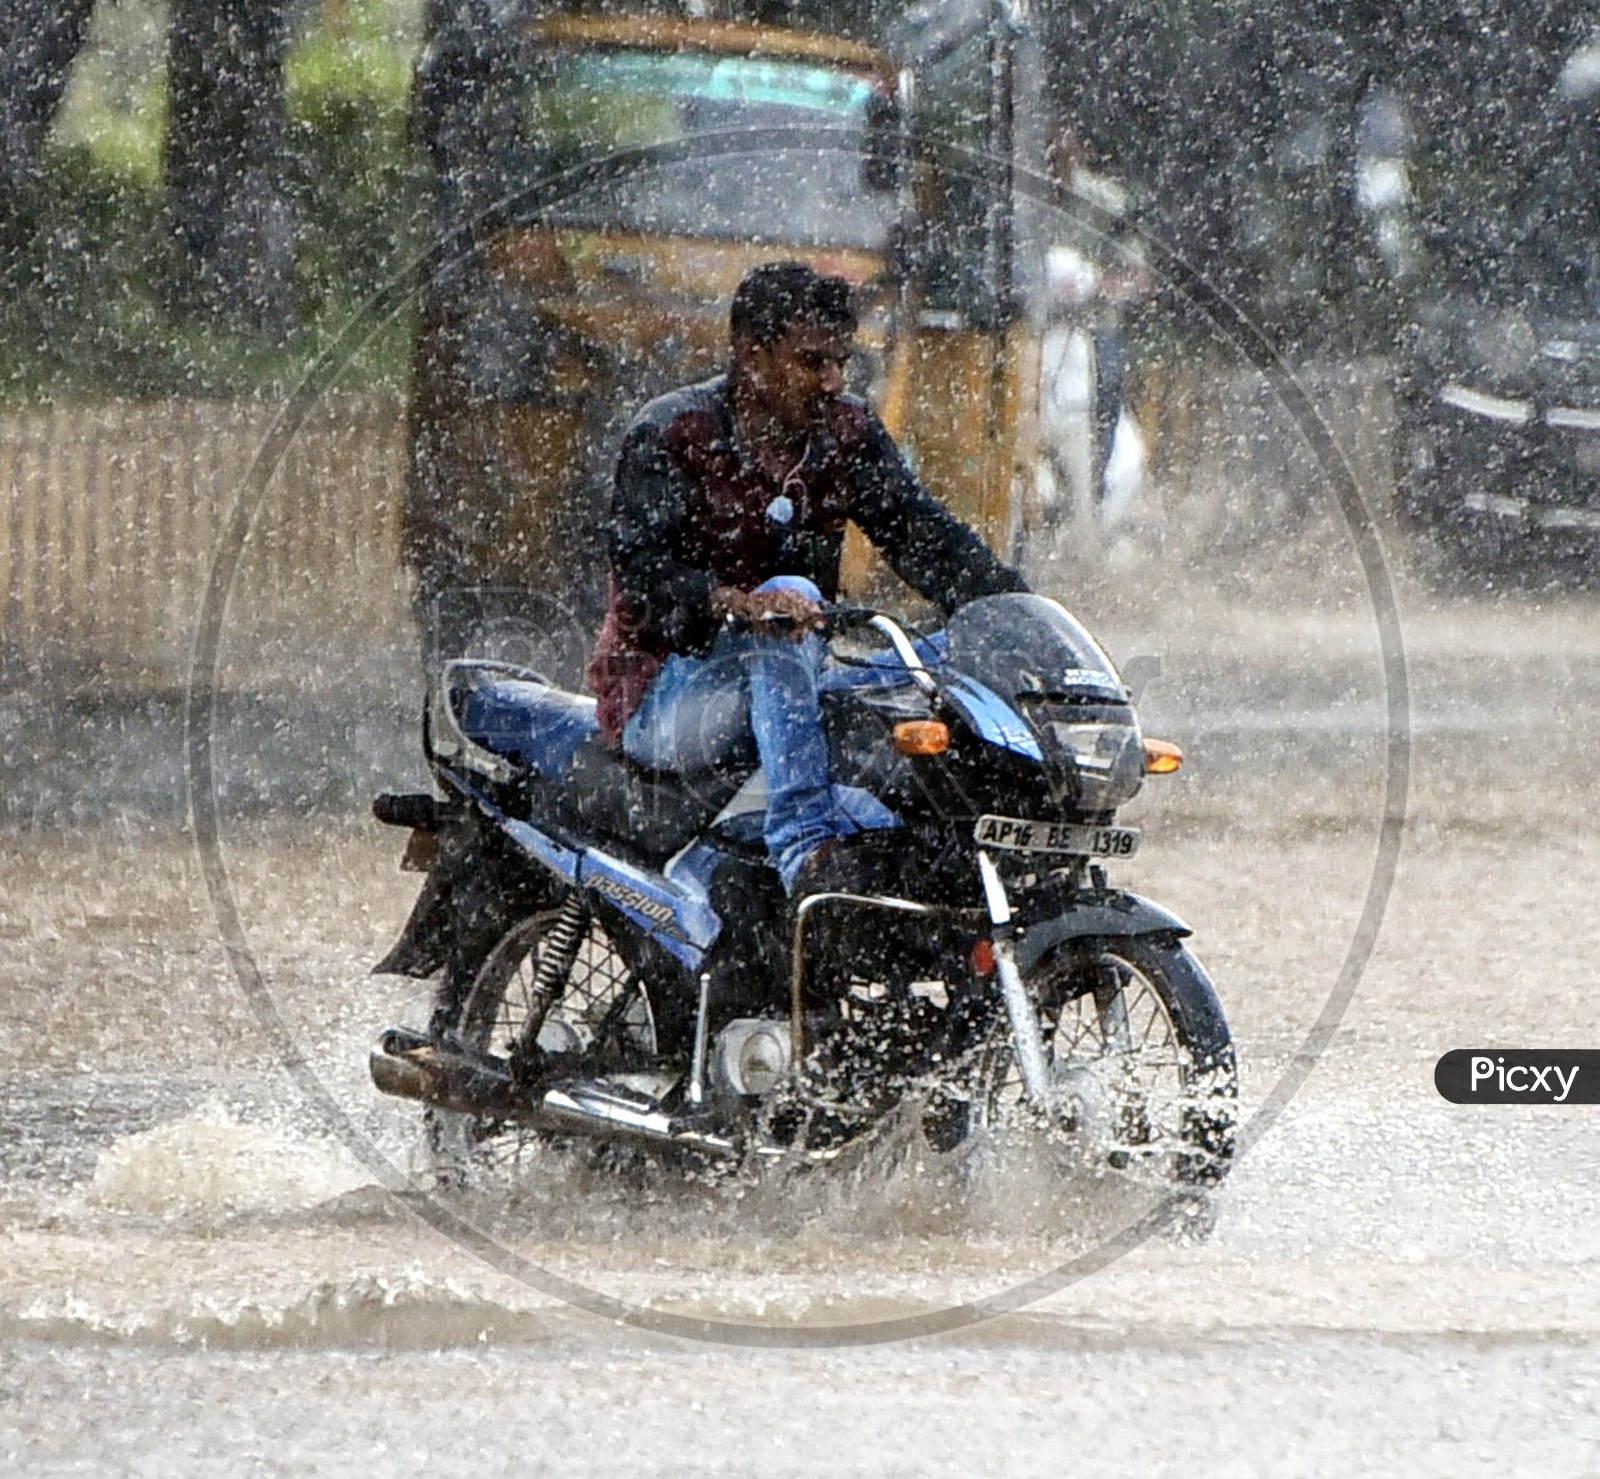 A man riding a bike on the road while it's raining